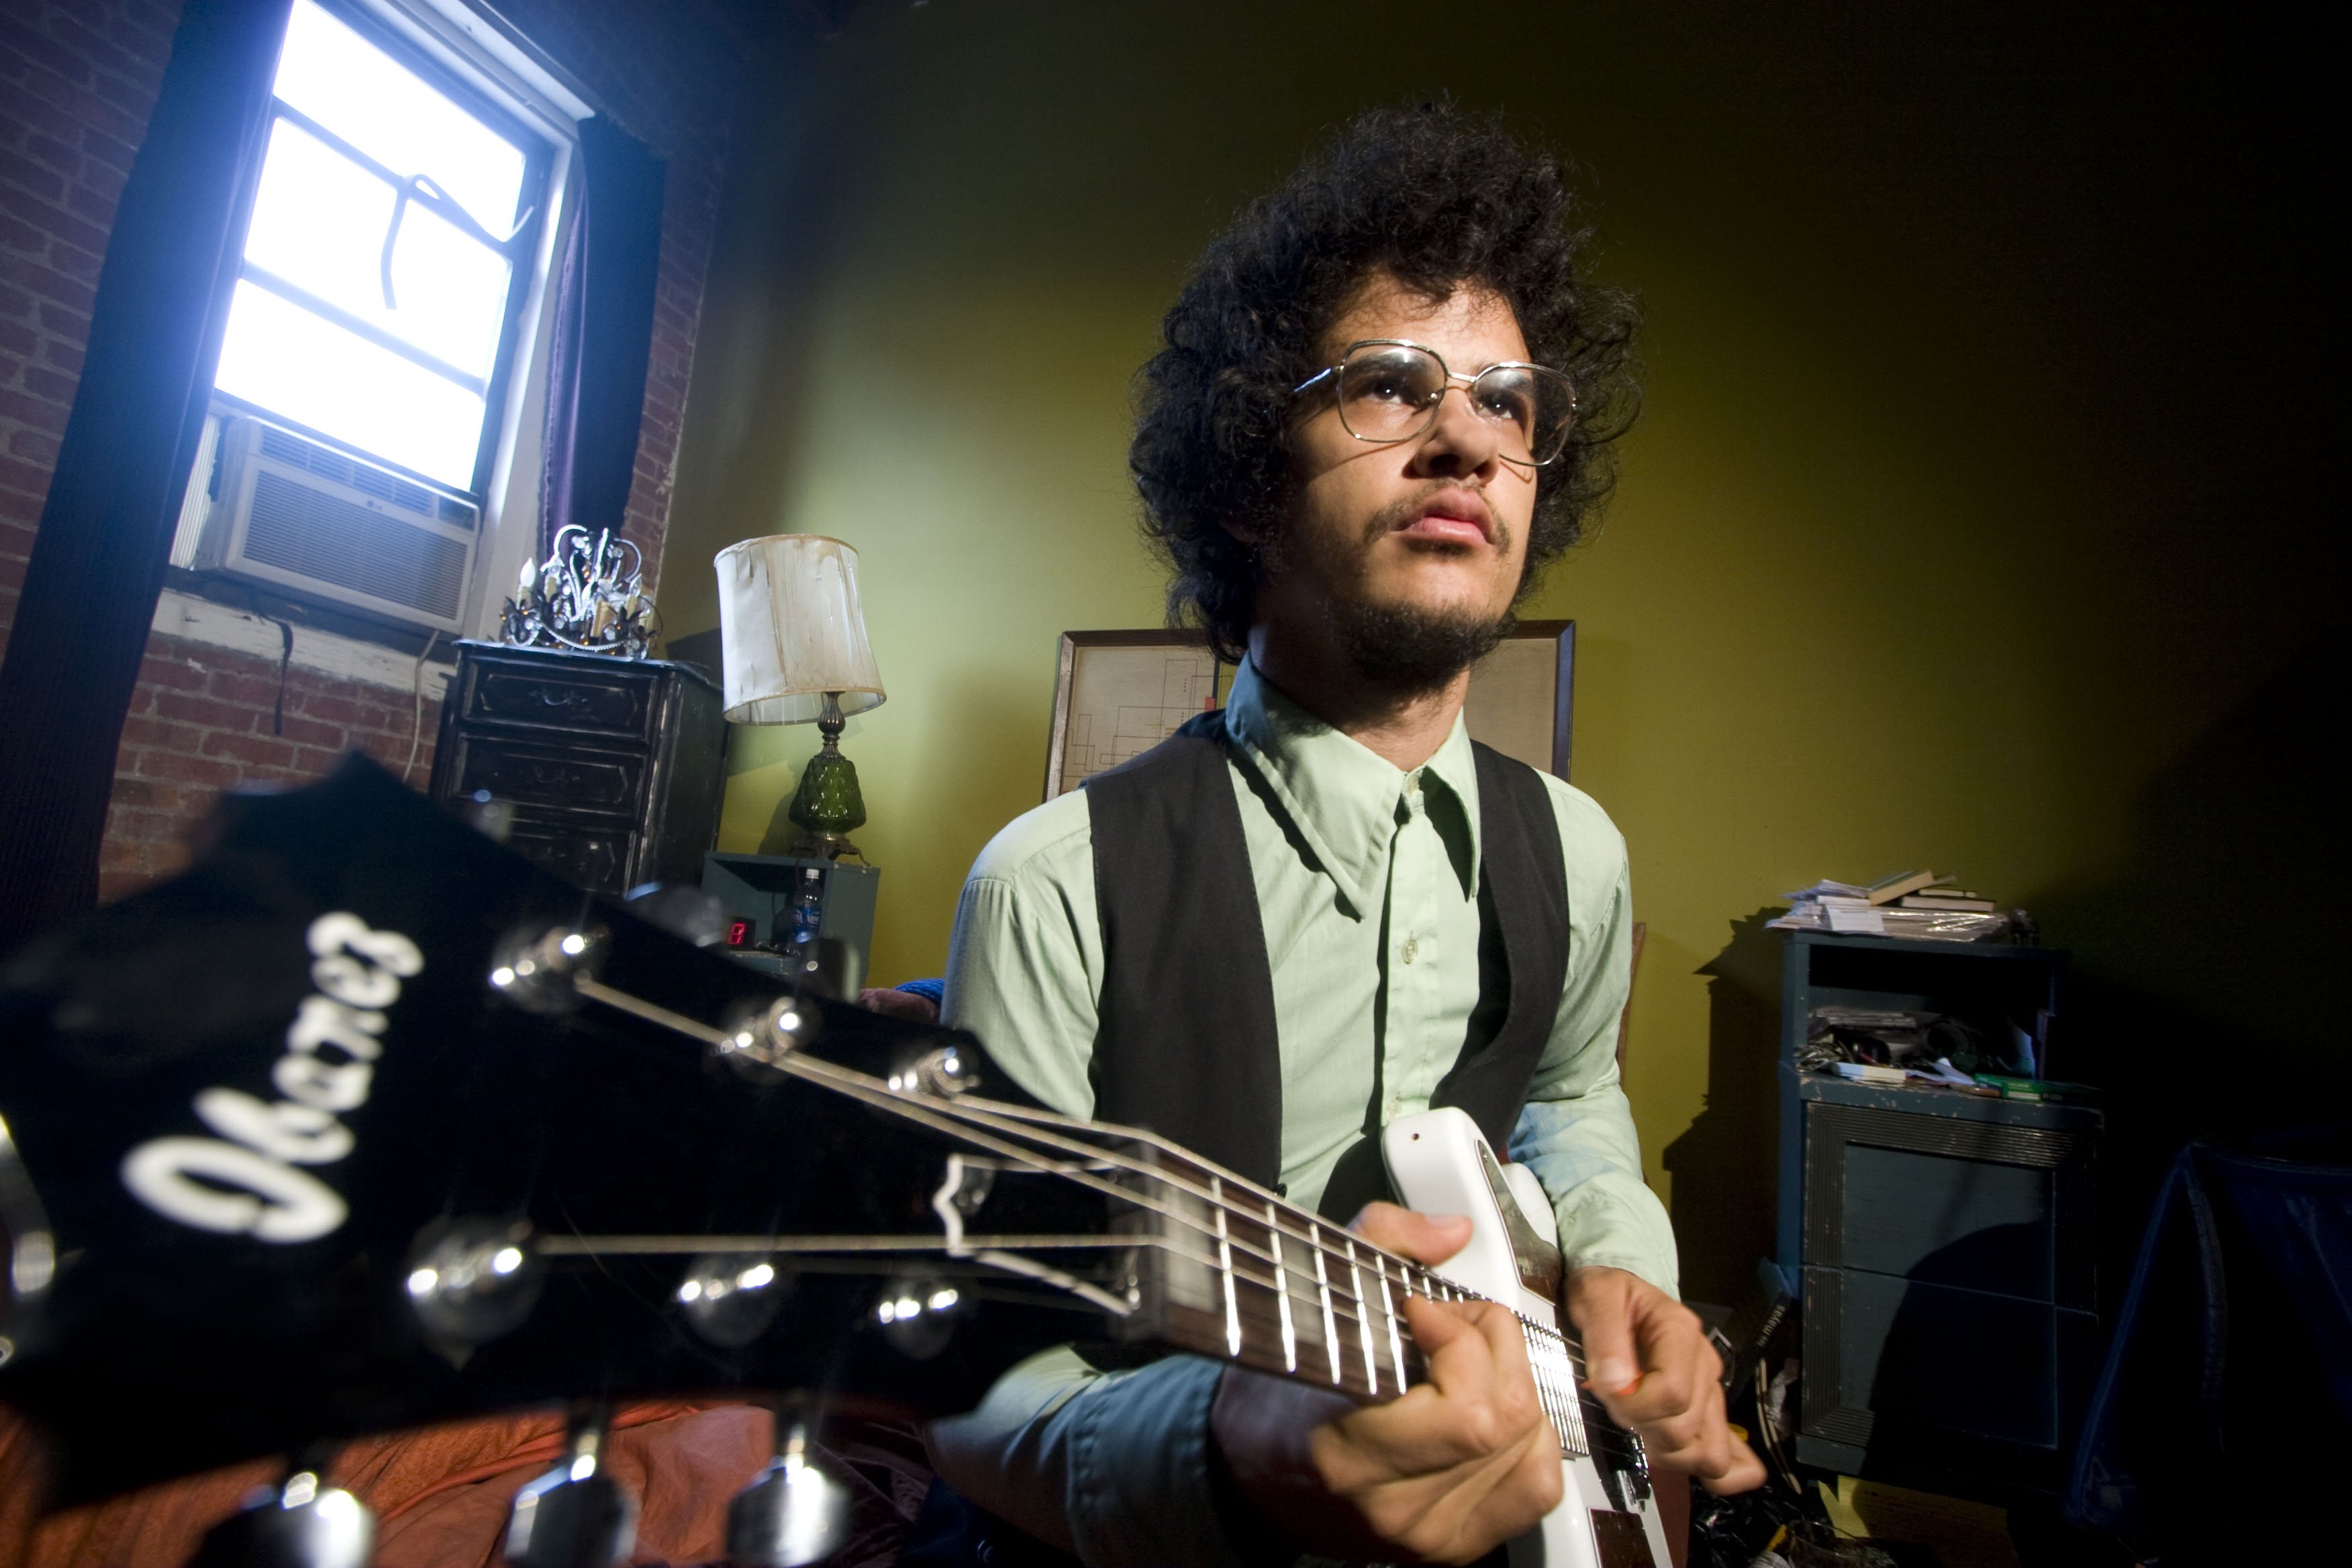 omar rodriguez lopez discography 320 full